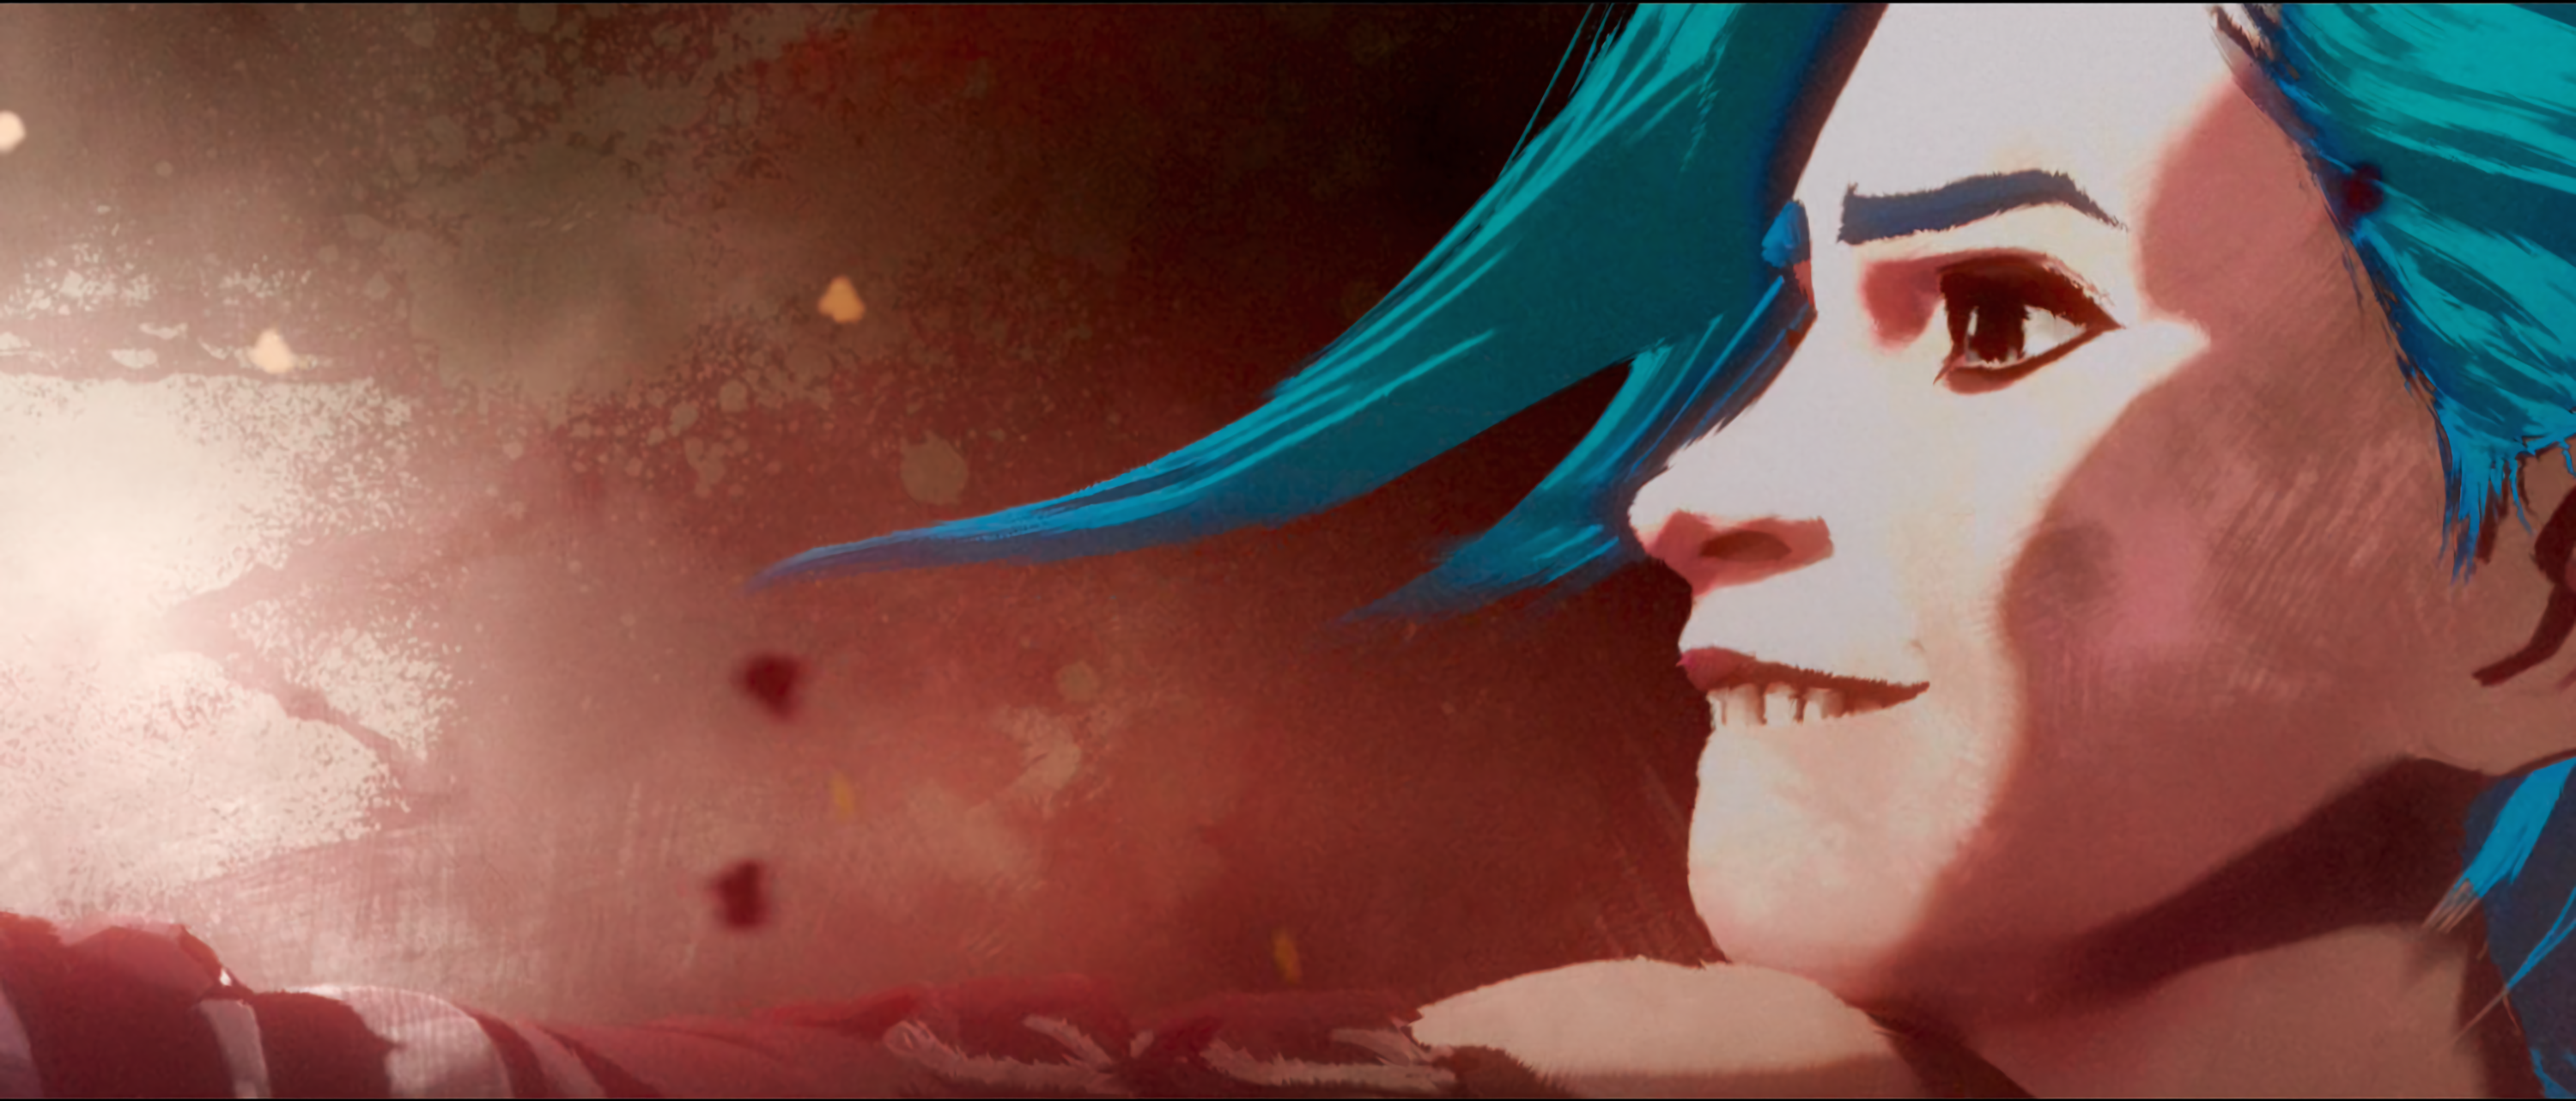 Anime 3000x1282 Jinx (League of Legends) Arcane face closeup profile PC gaming fan art video game girls video game characters